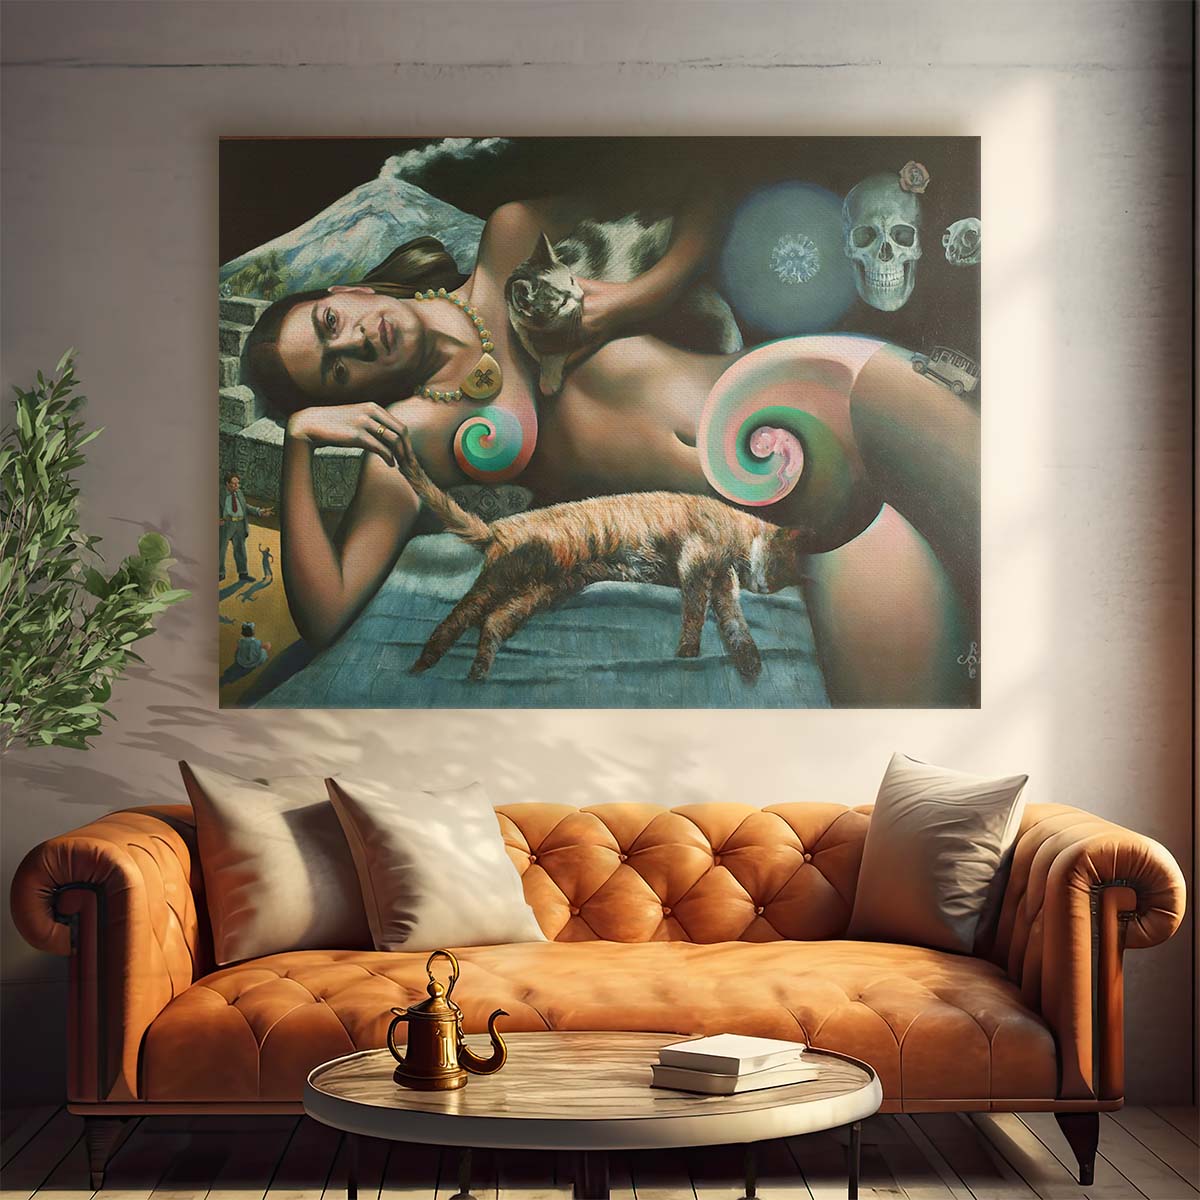 Frida Kahlo Surrealist Cubist Fantasy Oil Wall Art by Luxuriance Designs. Made in USA.